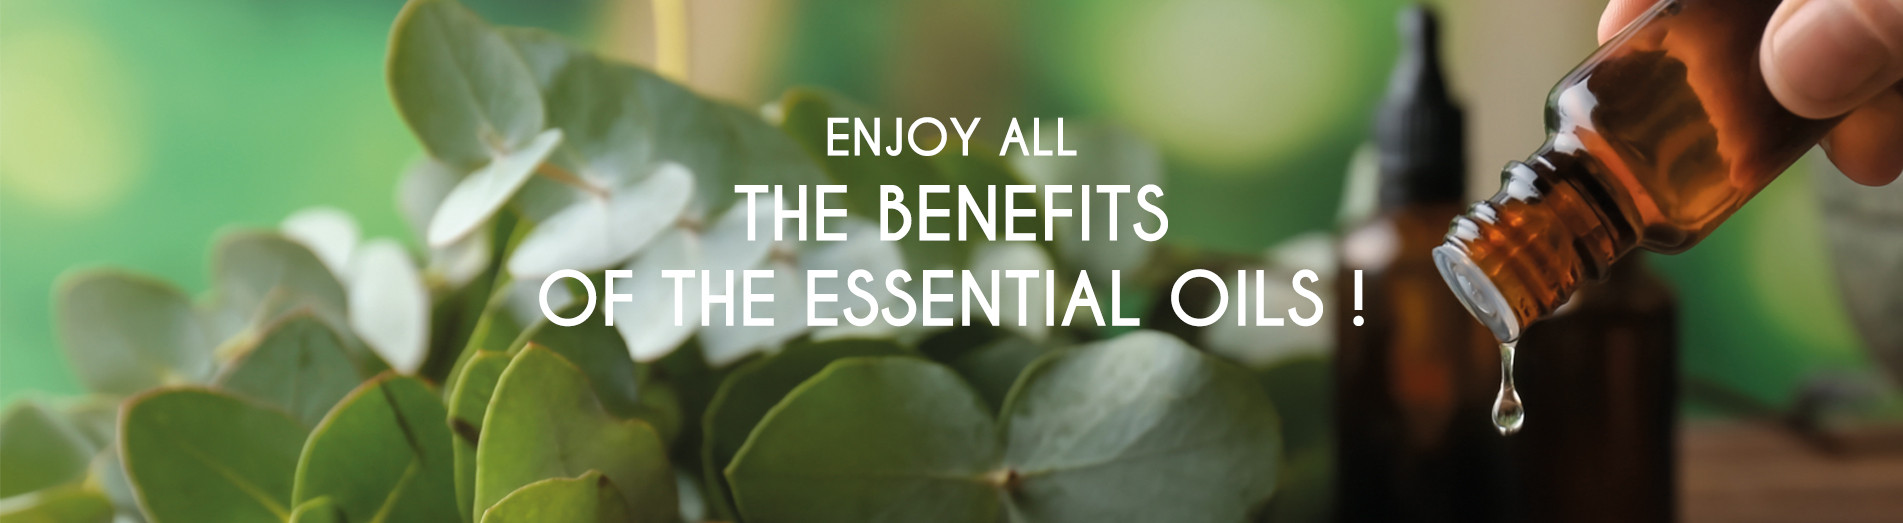 Enjoy all the benefits of the essential oils !